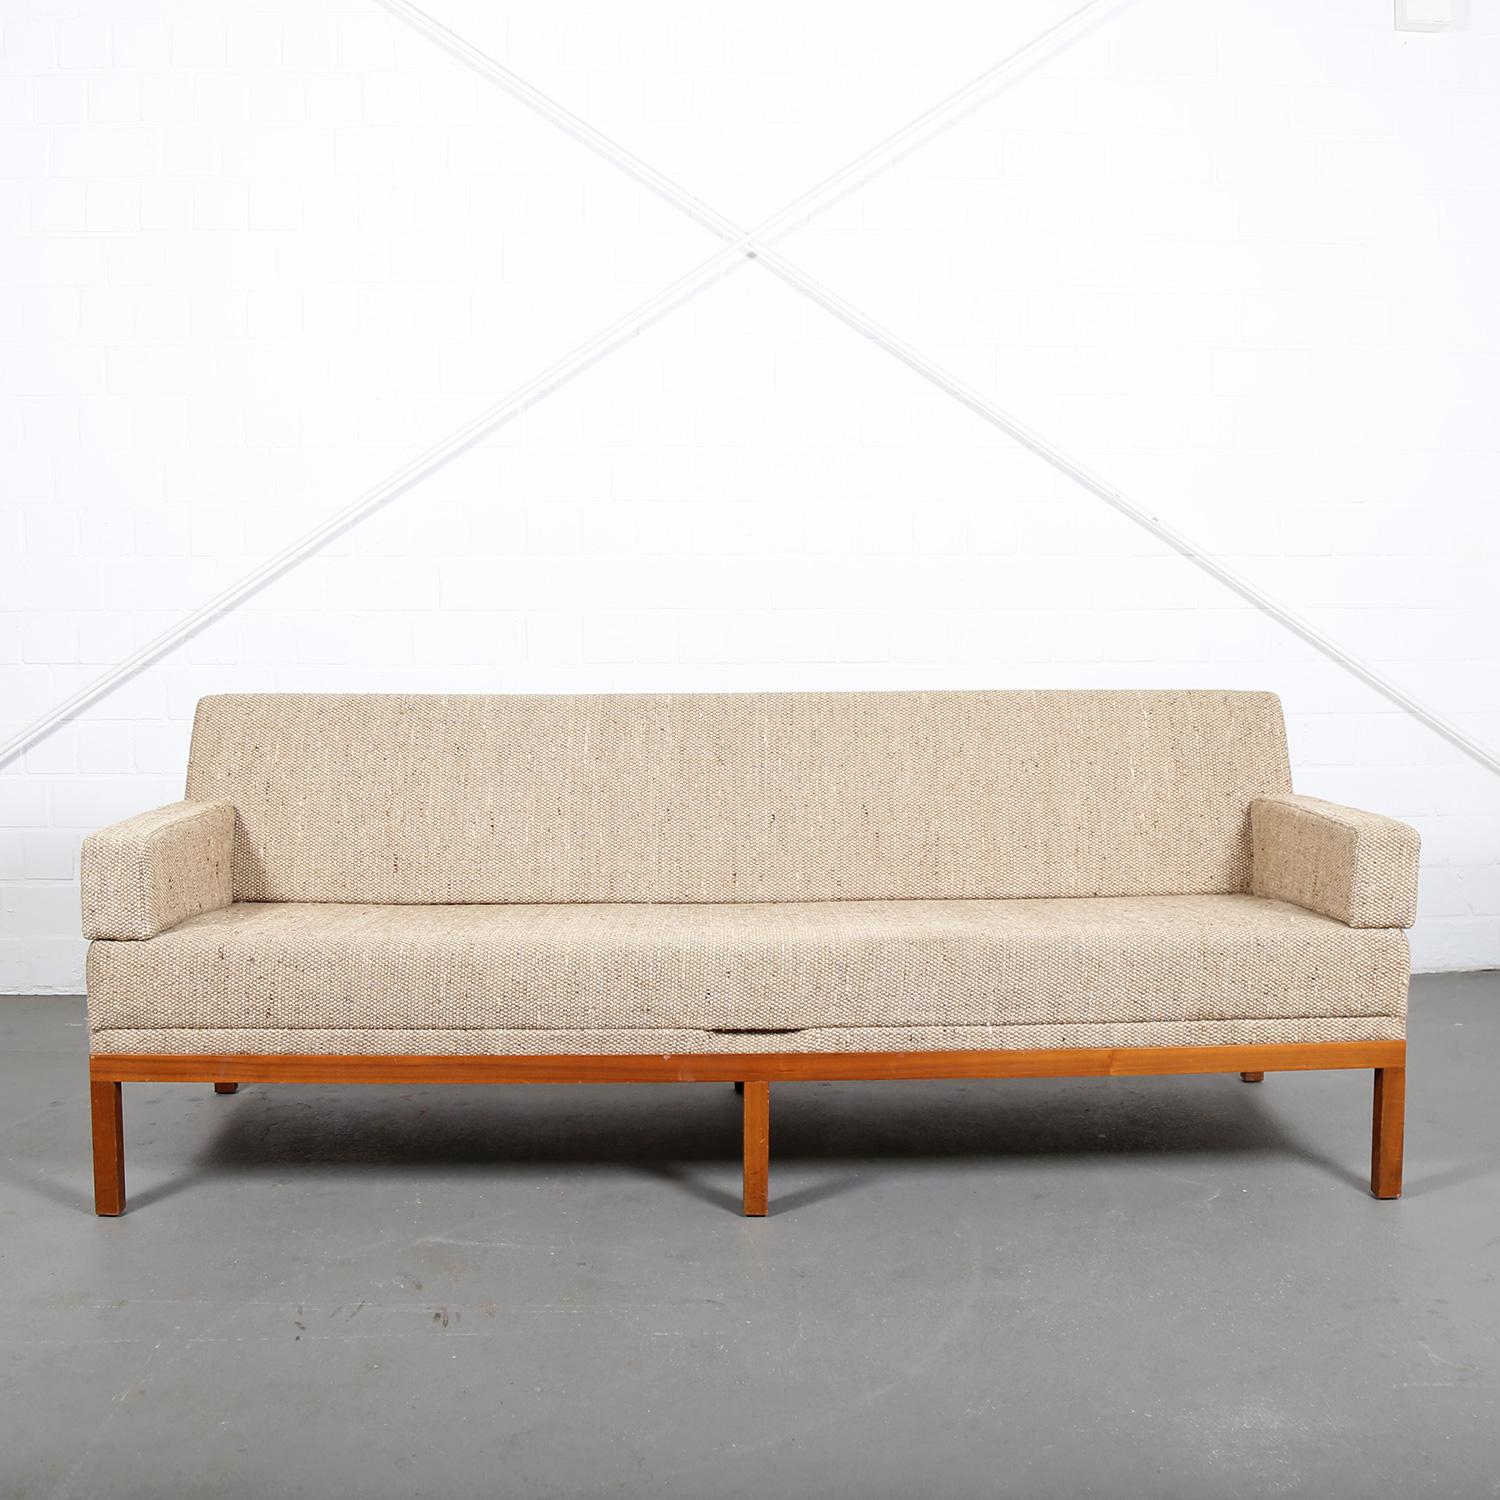 Well-preserved daybed, model Constanze, designed by Johannes Spalt for Wittmann in the 1960s. The original, coarse wool is still in good condition and goes perfectly with the rarer wooden frame of the sofa. In addition, the armrests are also